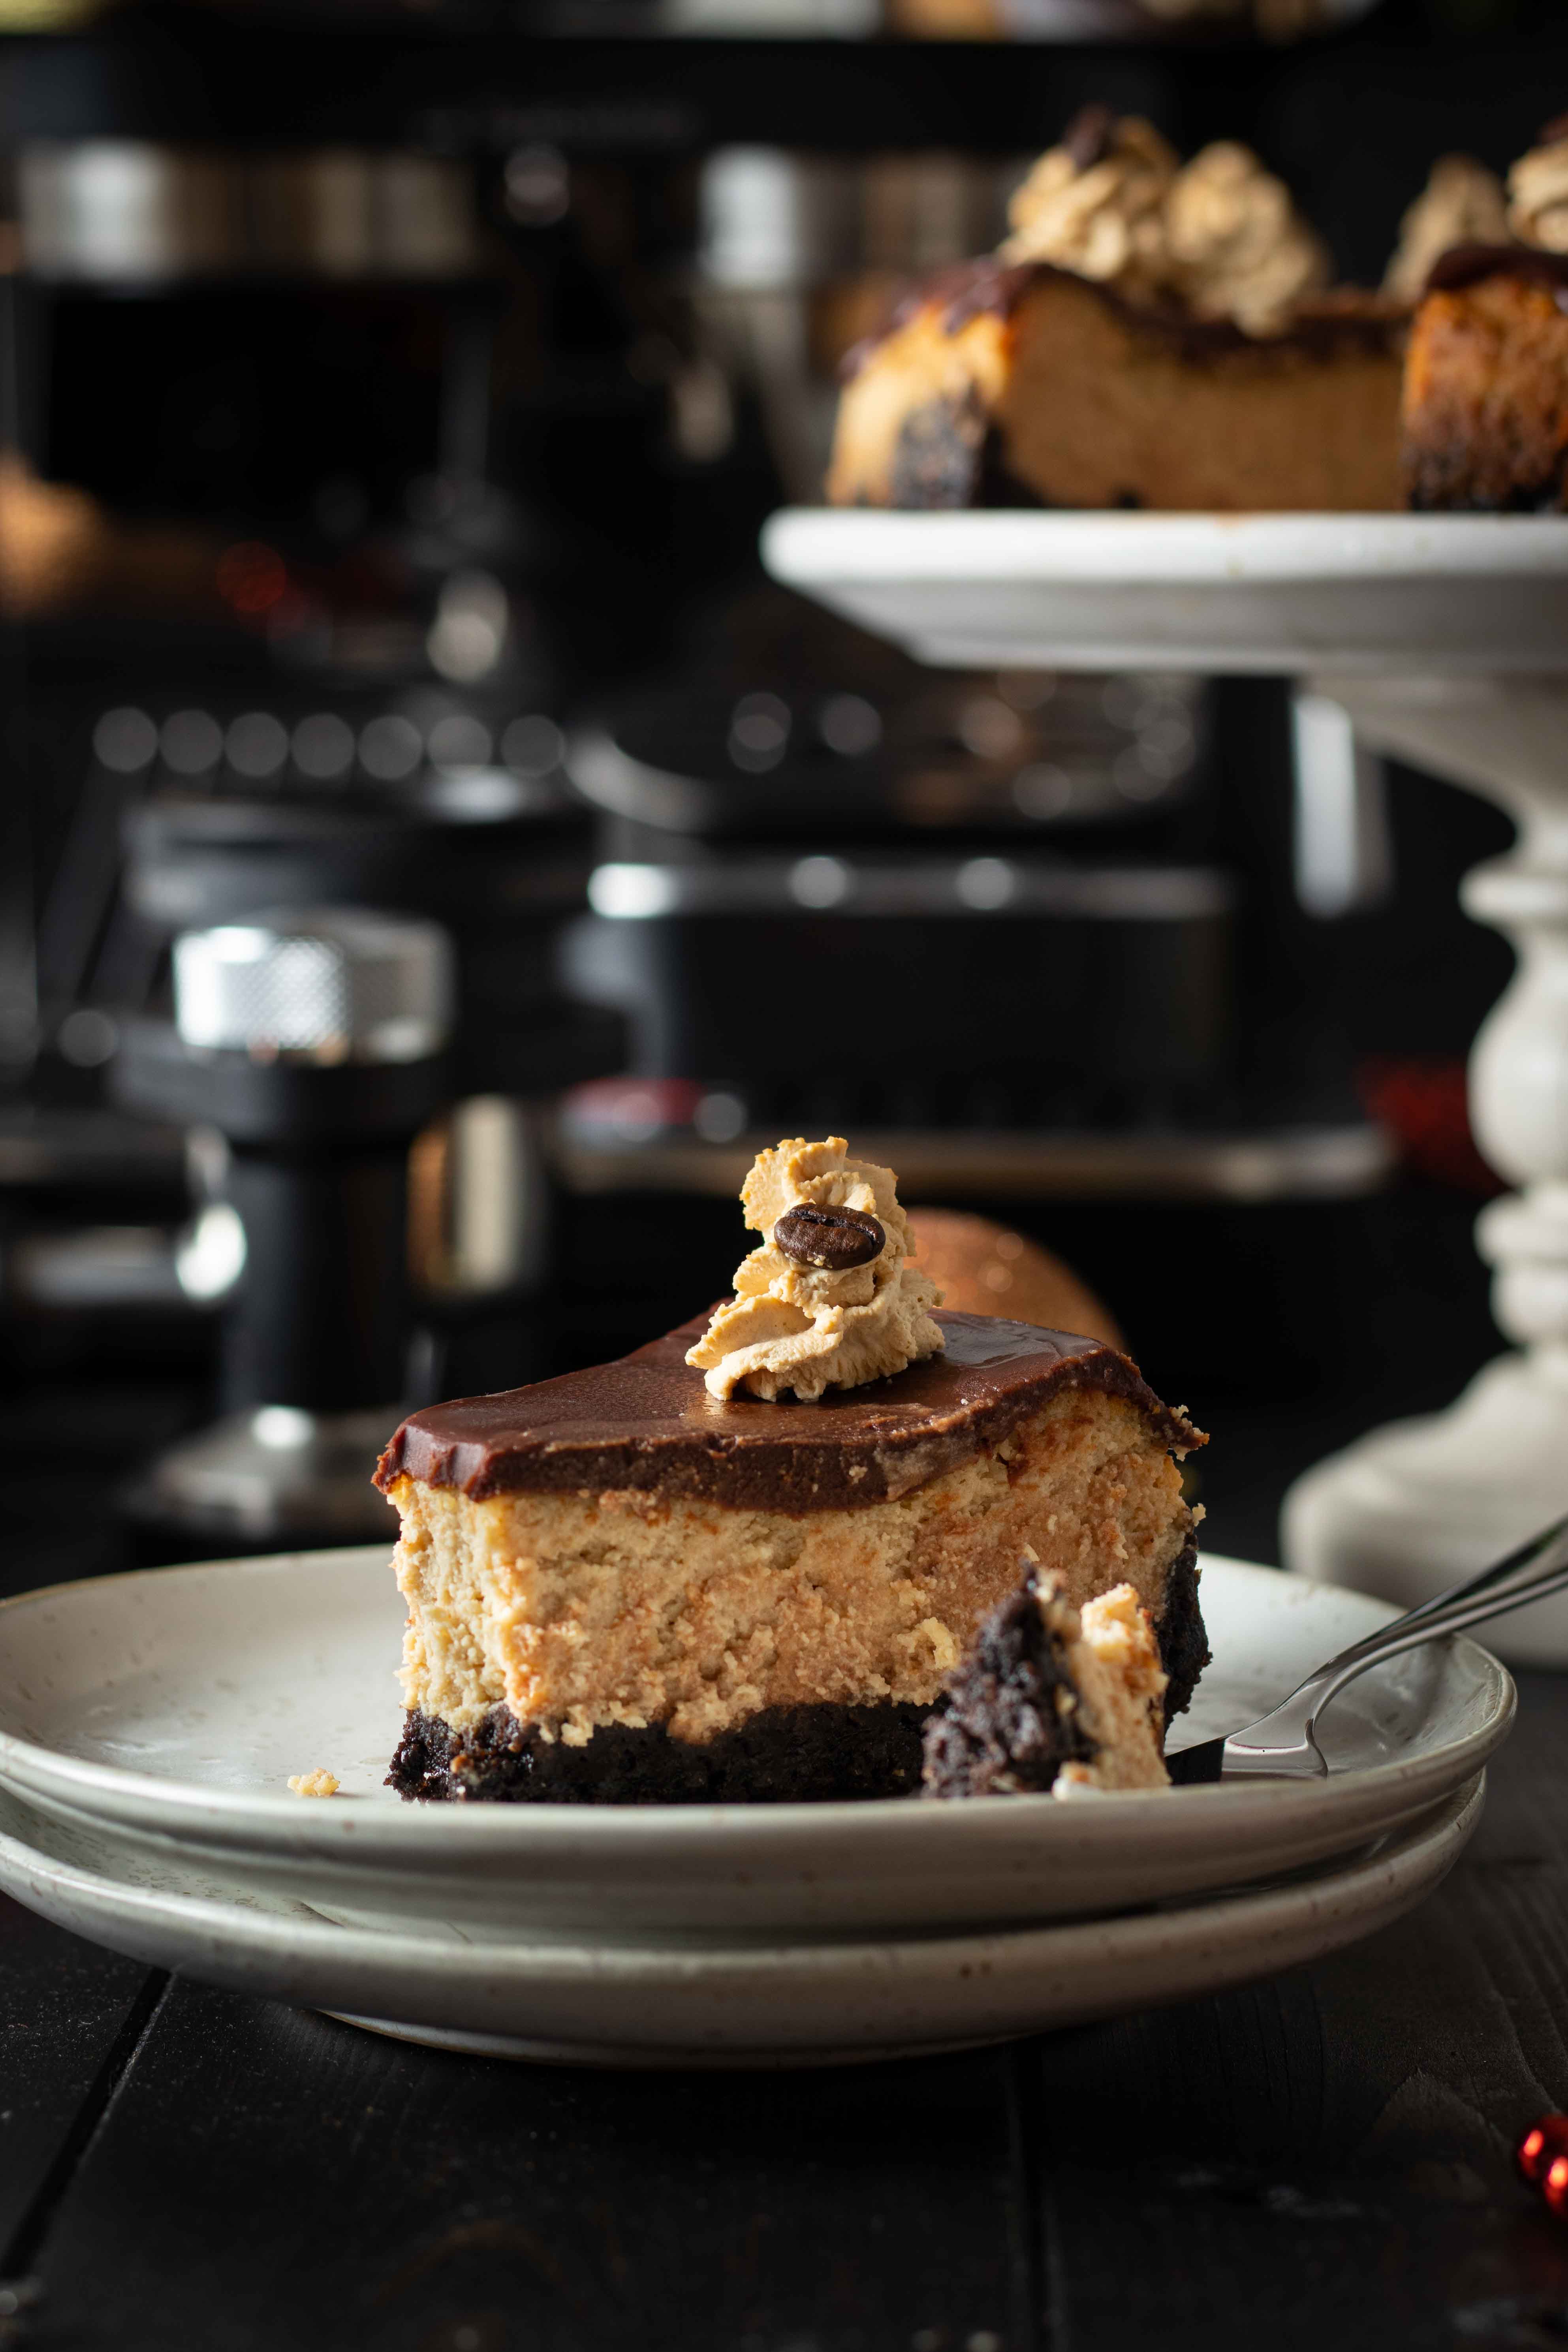 Coffee cheesecake with mocha cream frosting